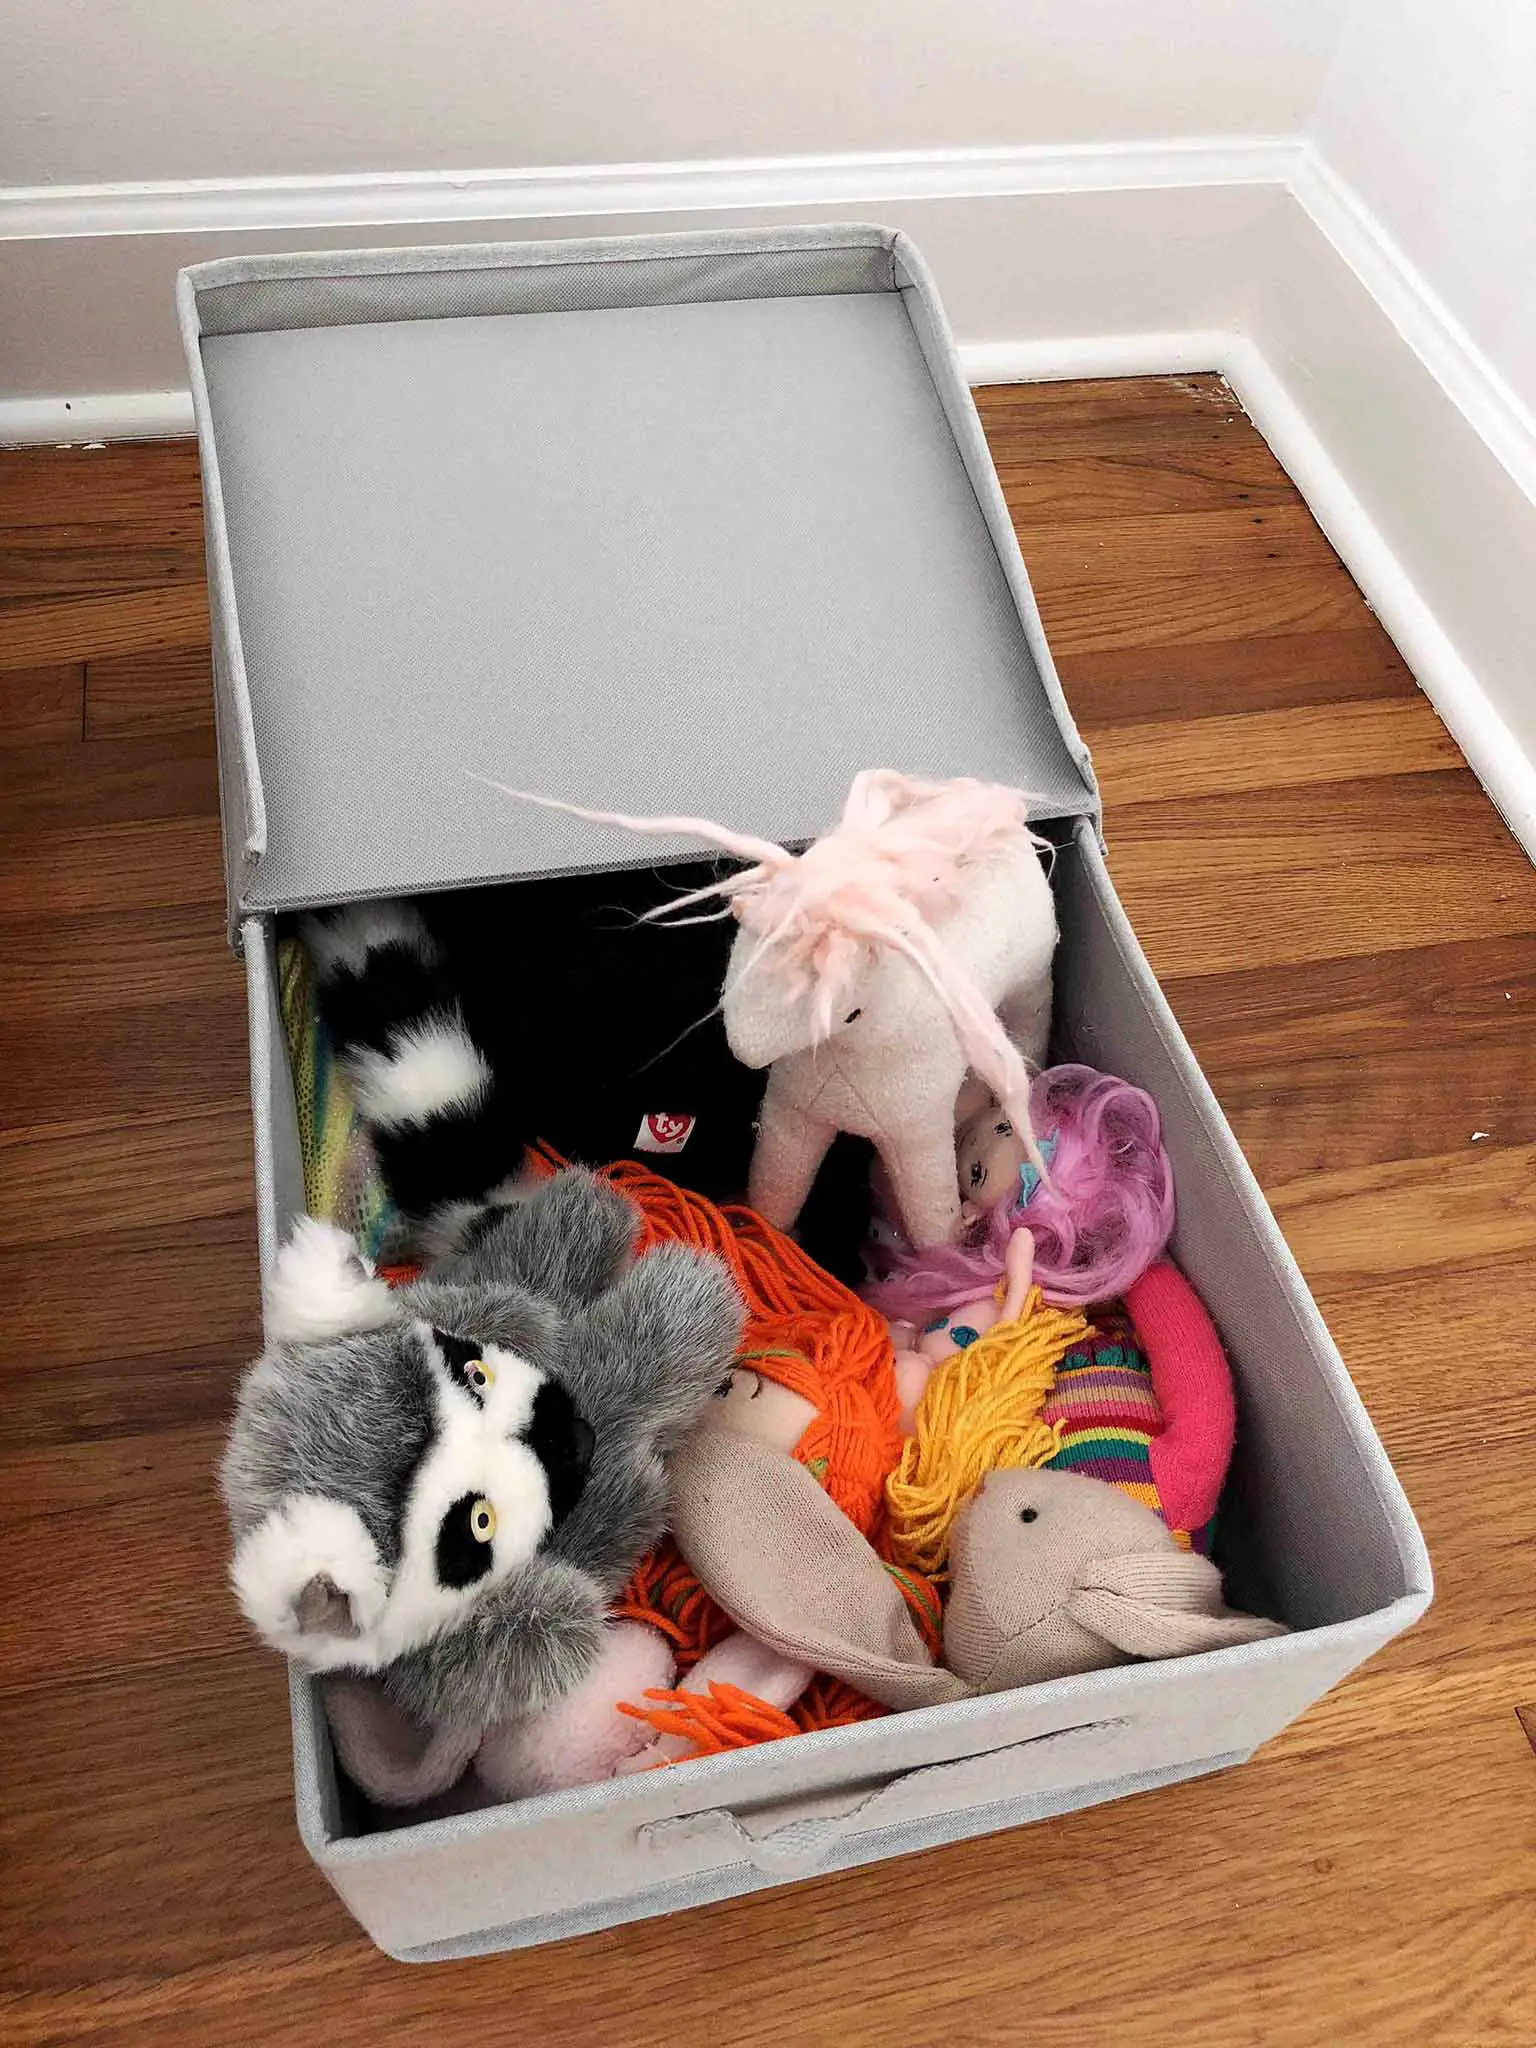 Underbed storage for stuffed animals - Guest Participant of the One Room Challenge - That Homebird Life Blog